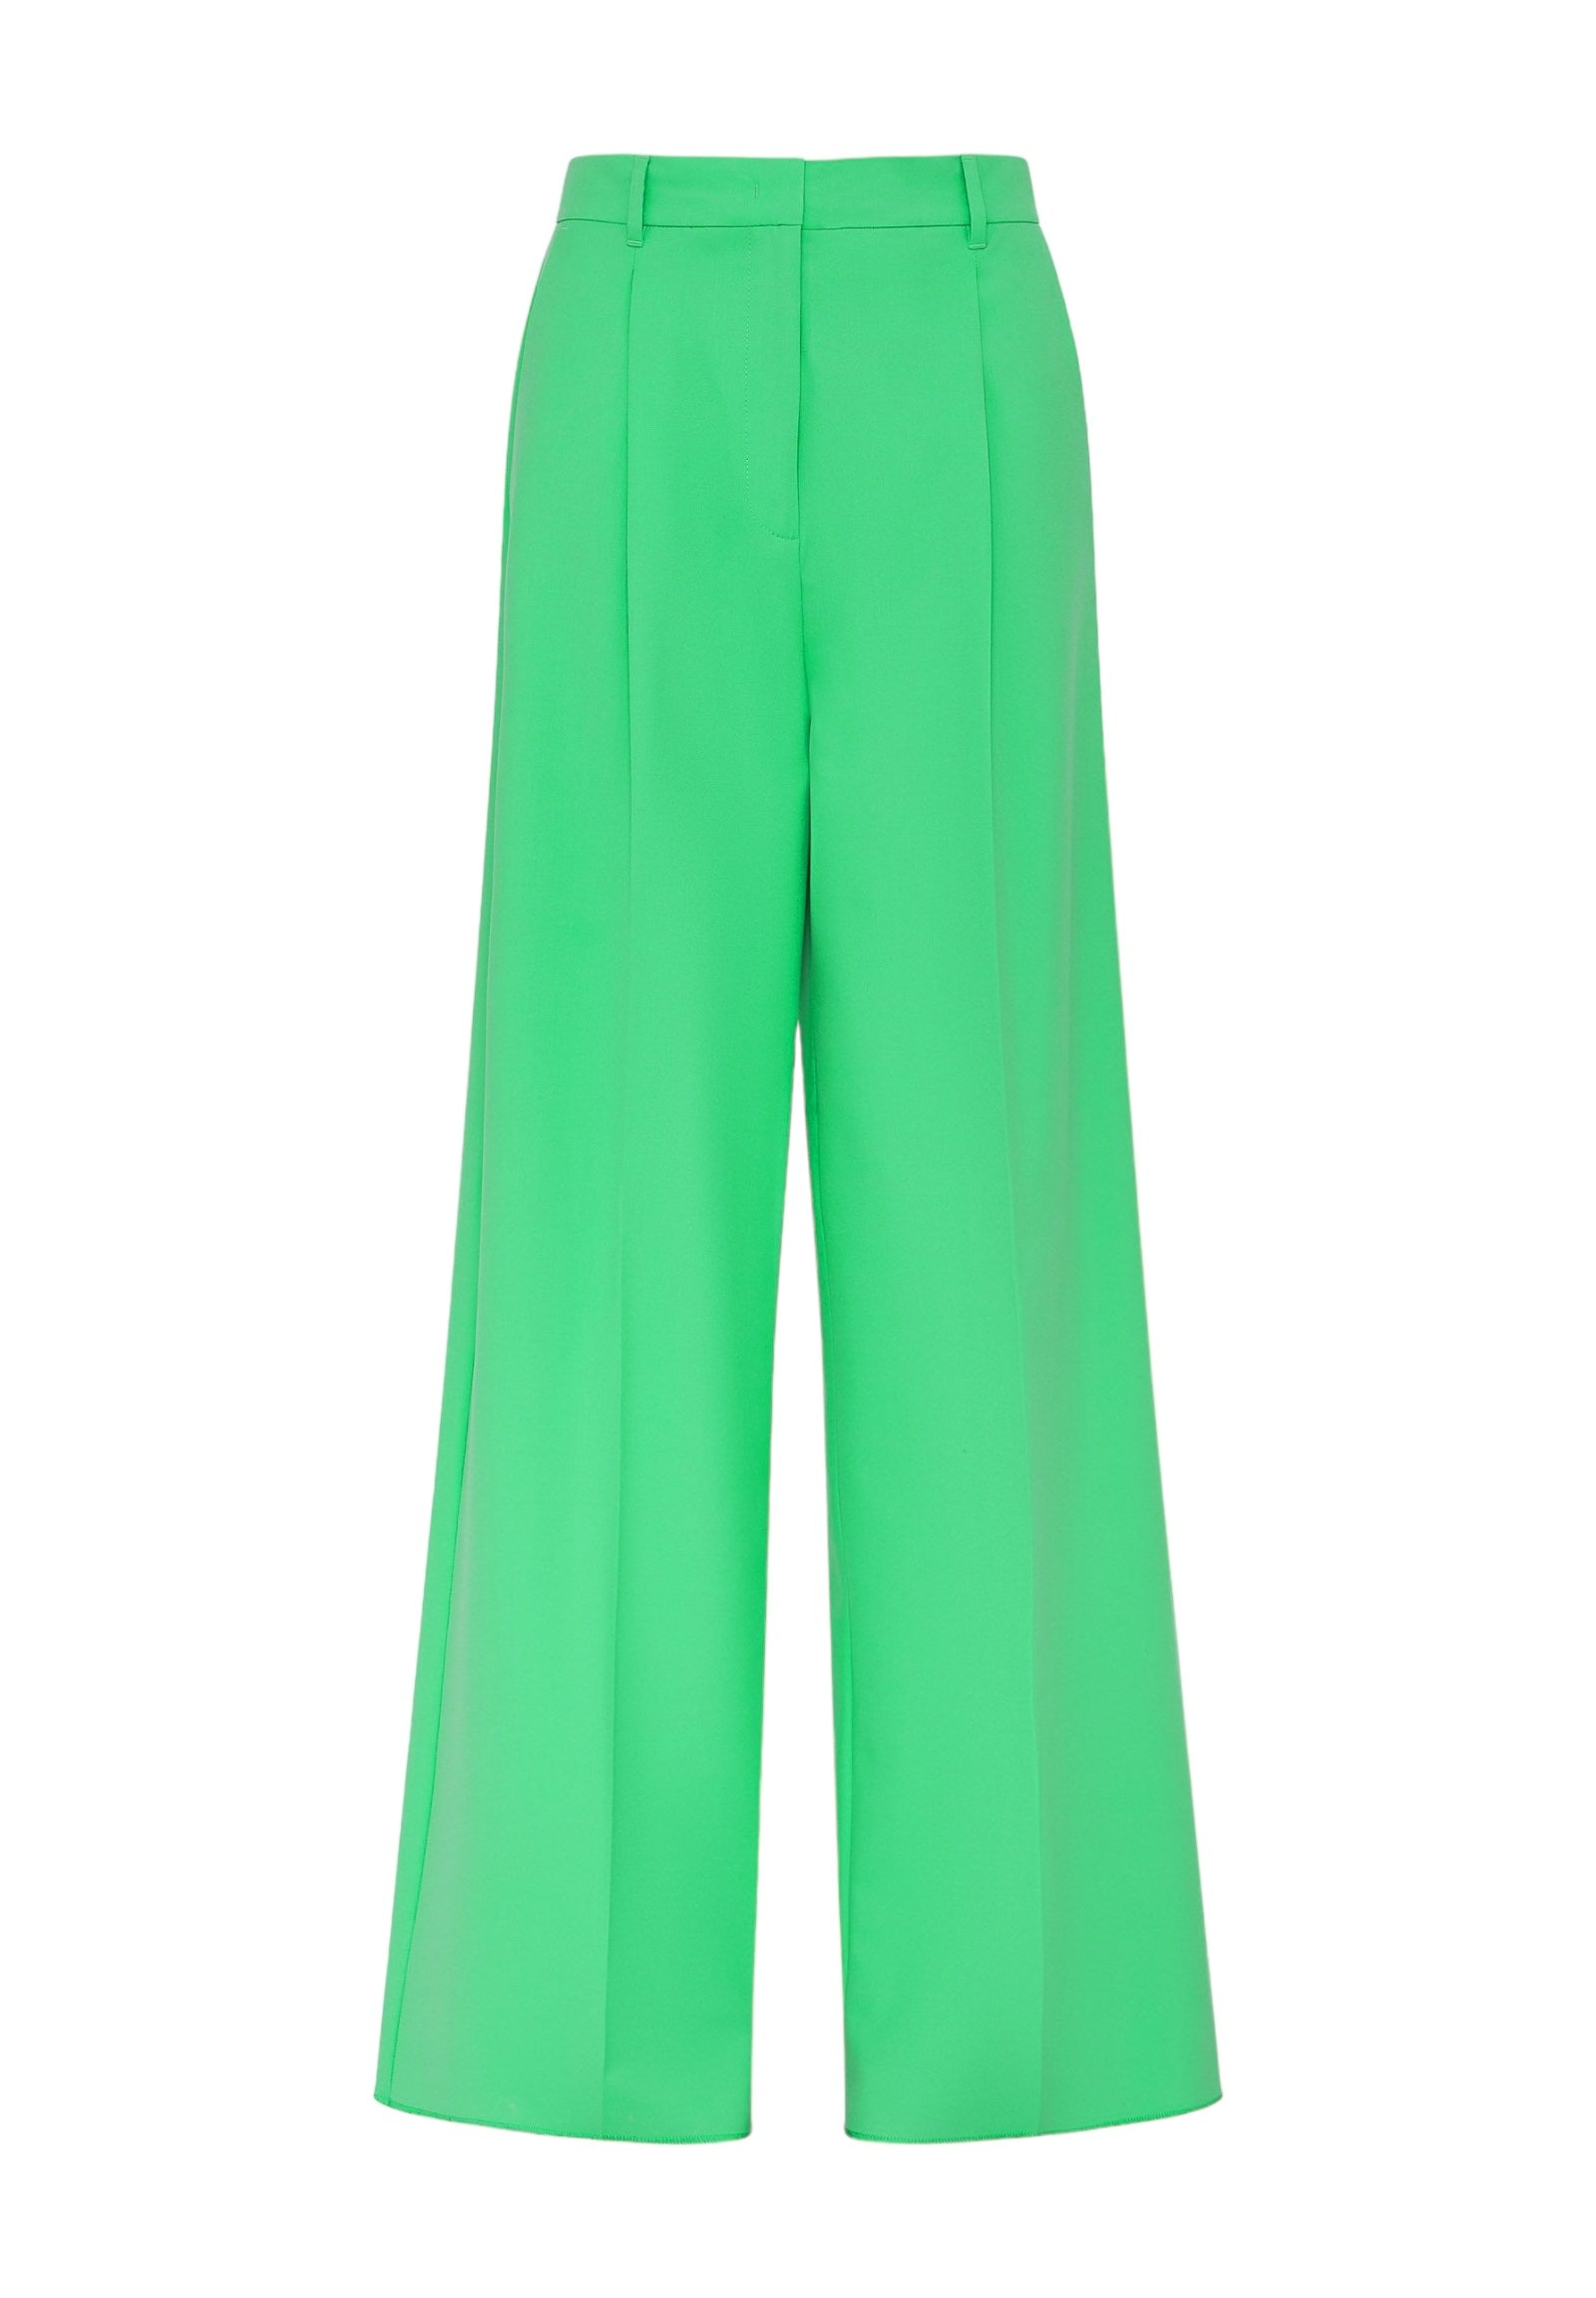 Affetto2 Bright Green Trousers